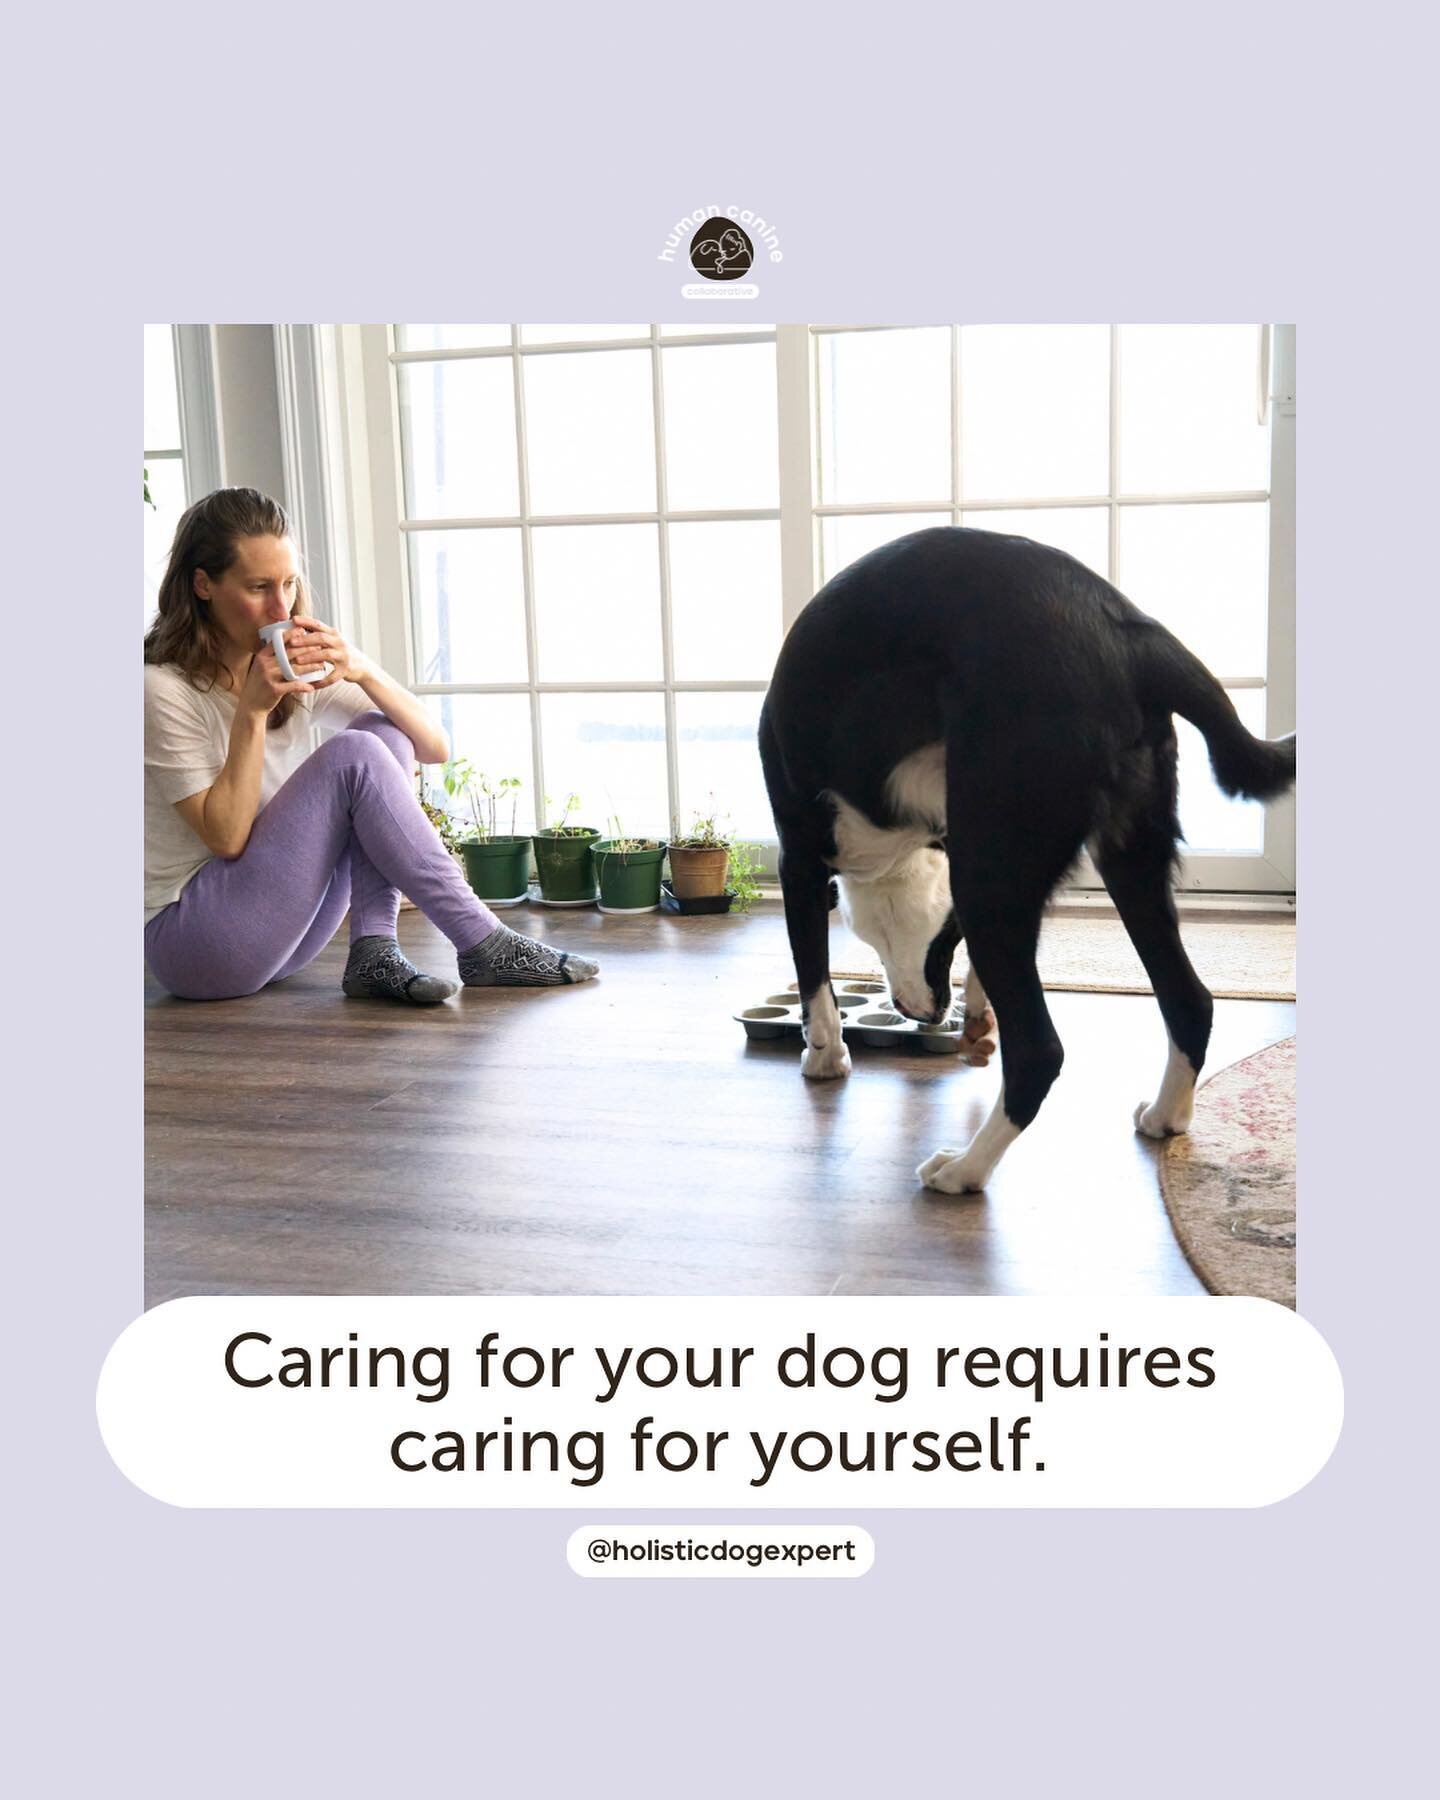 You&rsquo;ve heard the saying&hellip;&rdquo;you can&rsquo;t pour from an empty cup&rdquo;&hellip;and that means that you need to be cared for in order to provide care to others! This applies to all kinds of caregiving, including caring for our dogs, 